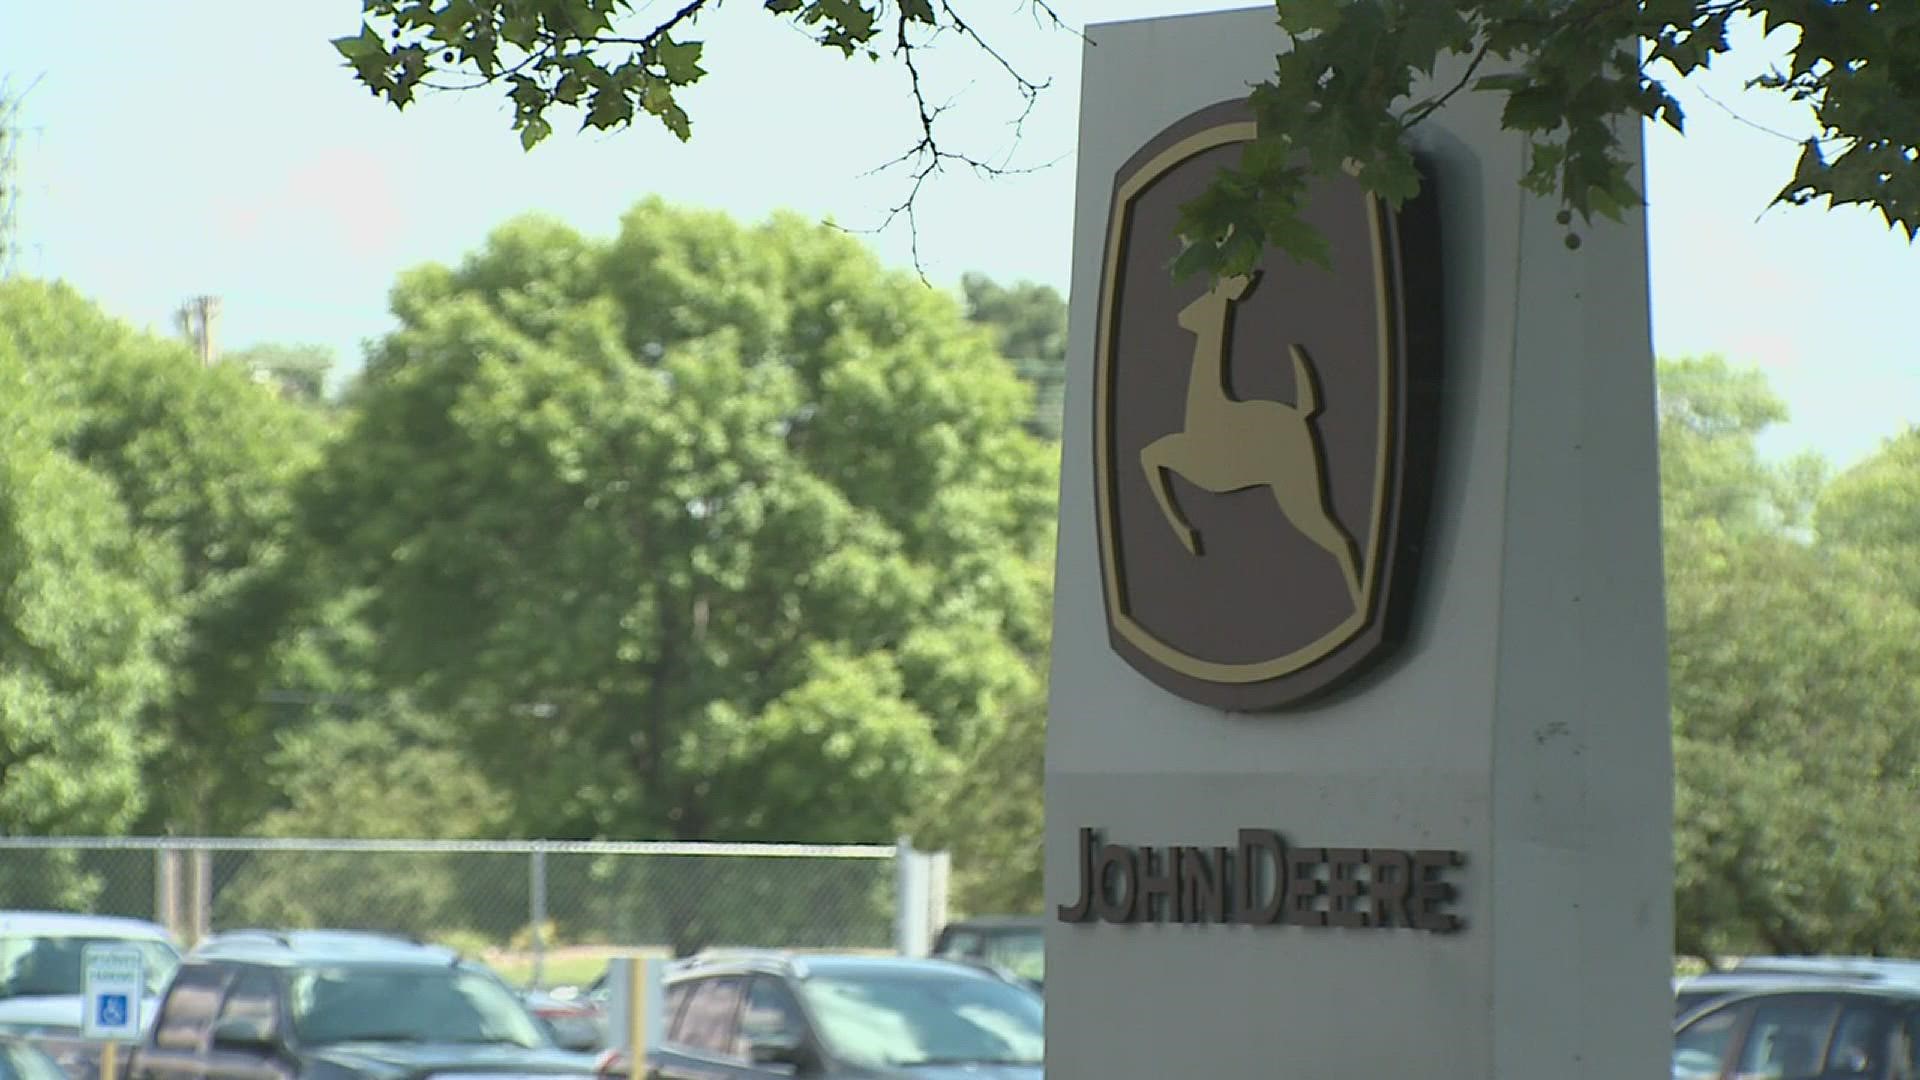 Negotiators for the United Auto Workers Union have until midnight on Oct. 13 to come to an agreement with Deere, extend the deadline again or authorize a strike.